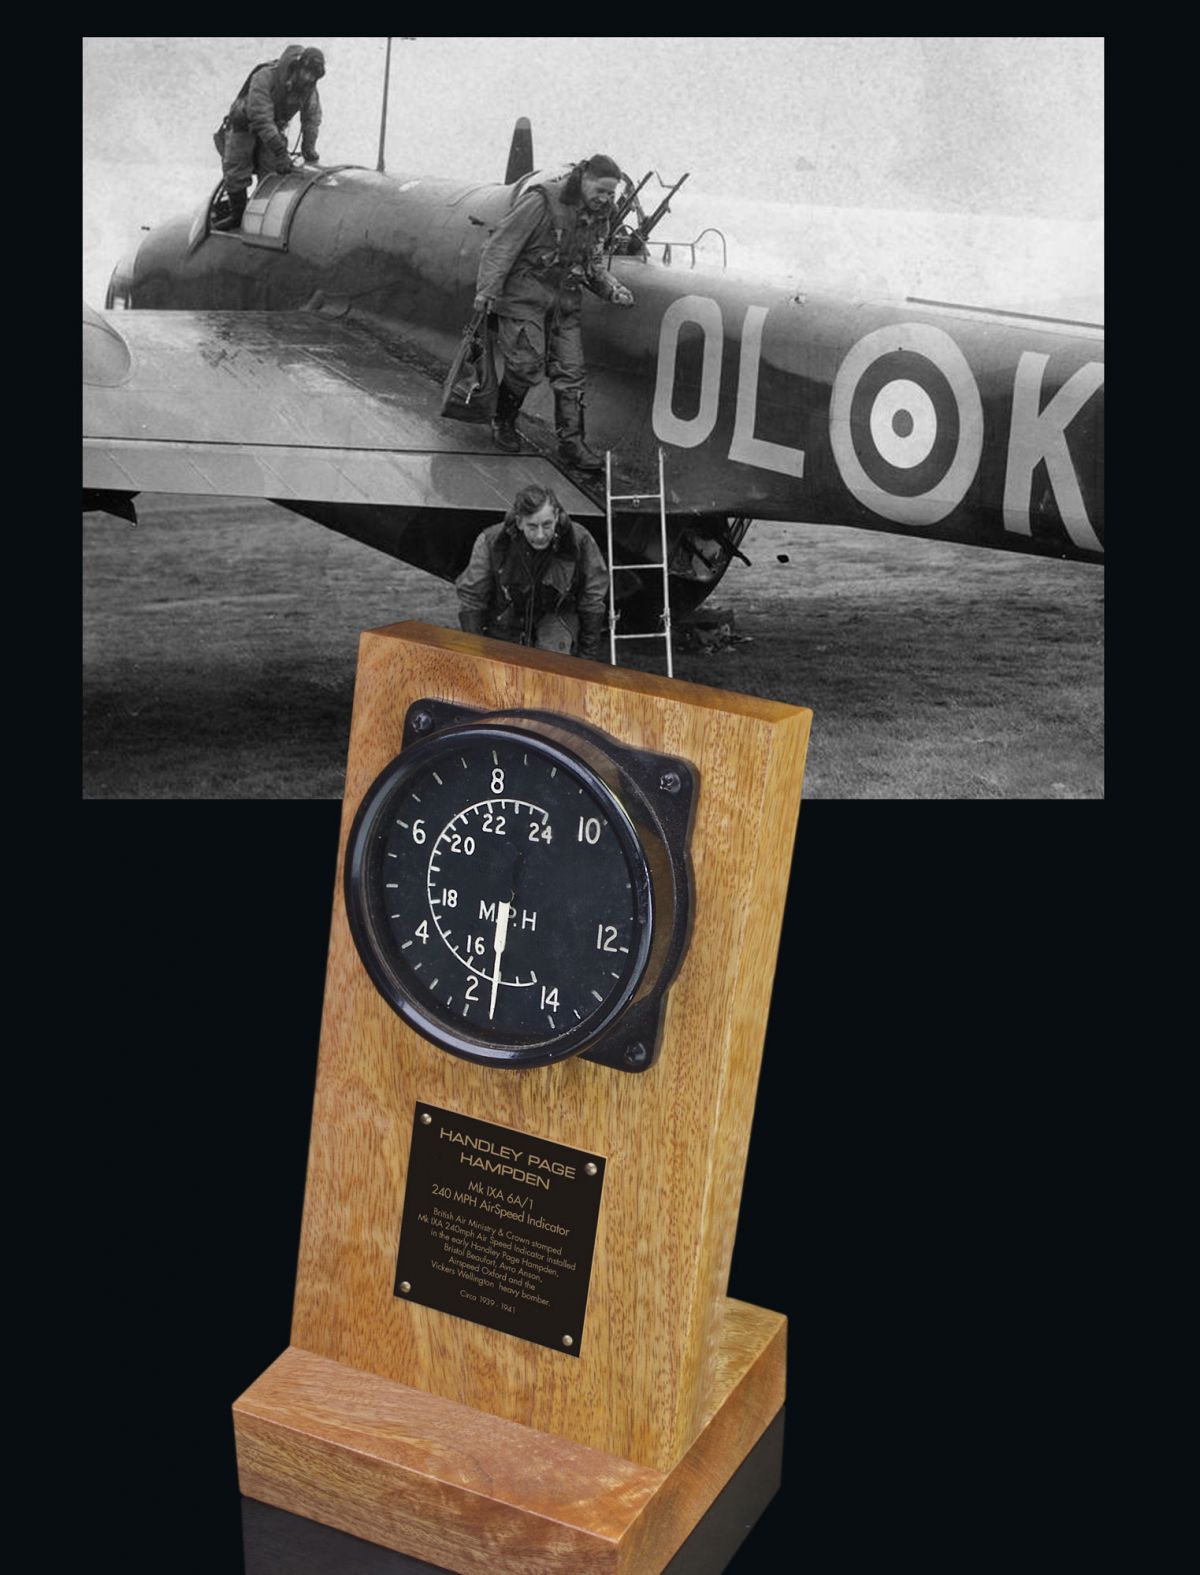 HANDLEY PAGE HAMPDEN AIR MINISTRY 240 MPH AIRSPEED INDICATOR